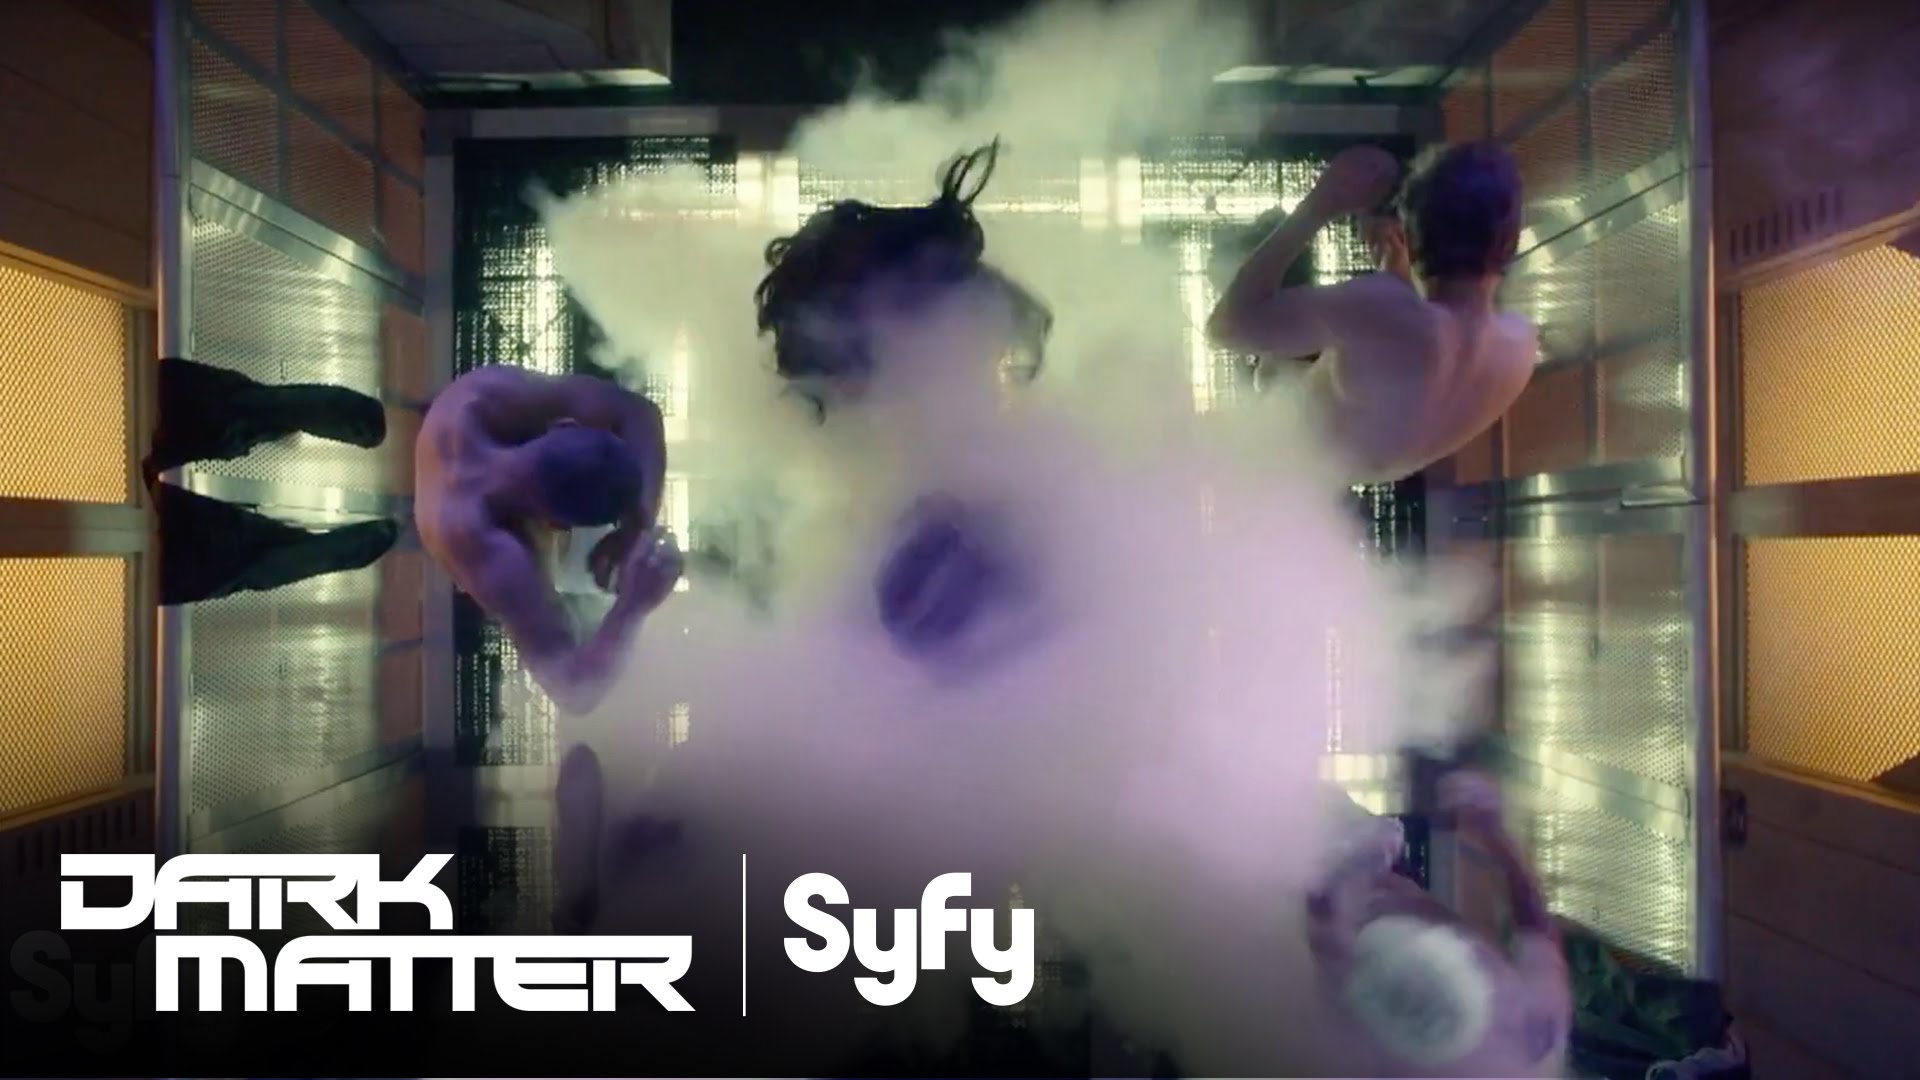 Syfy’s series DARK MATTER Returns to San Diego Comic-Con this year with Panel and Signings!